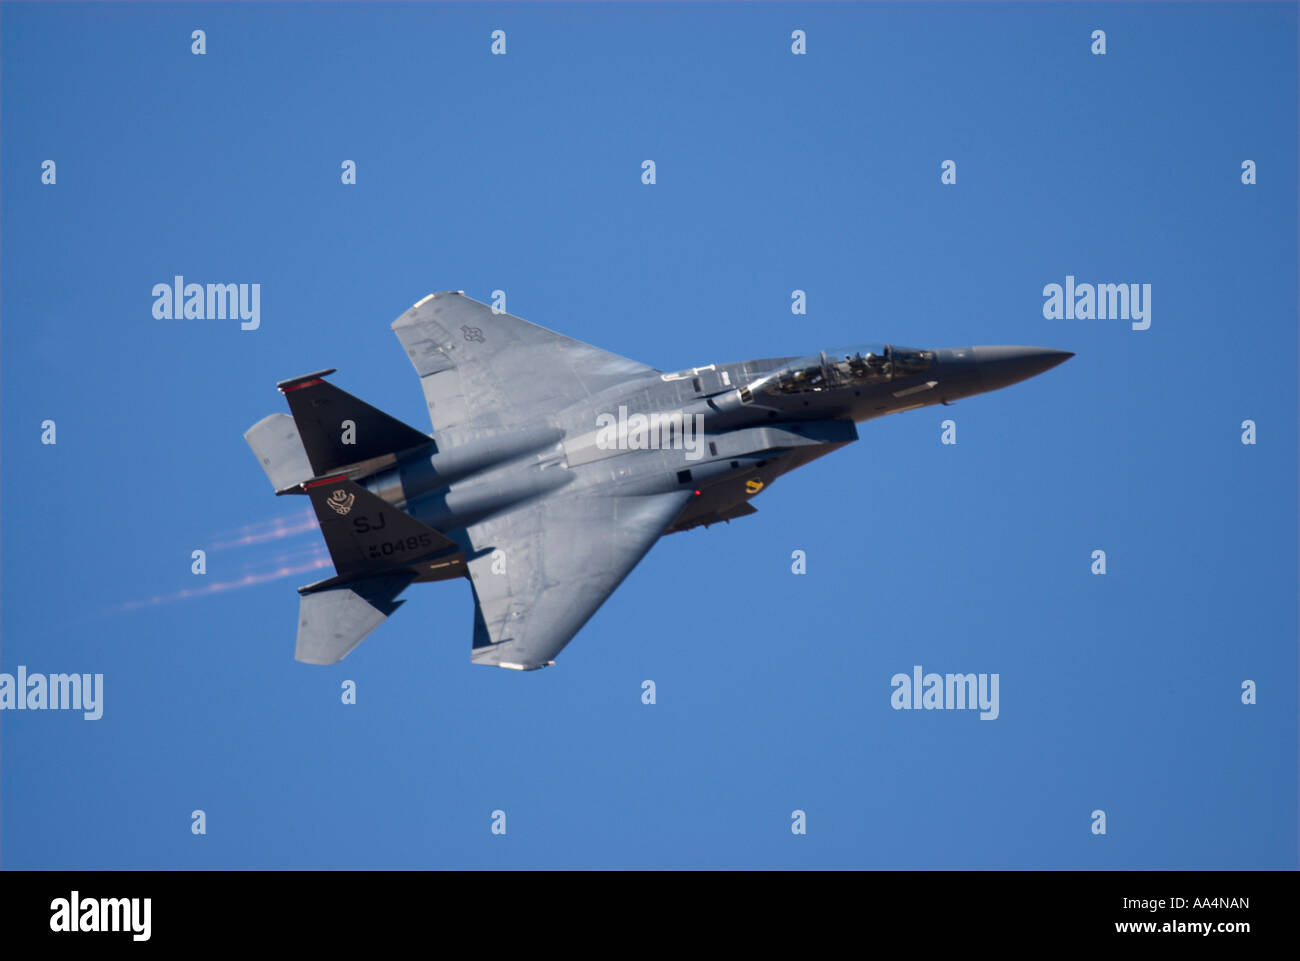 An F-15 Eagle in a bank turn. Stock Photo